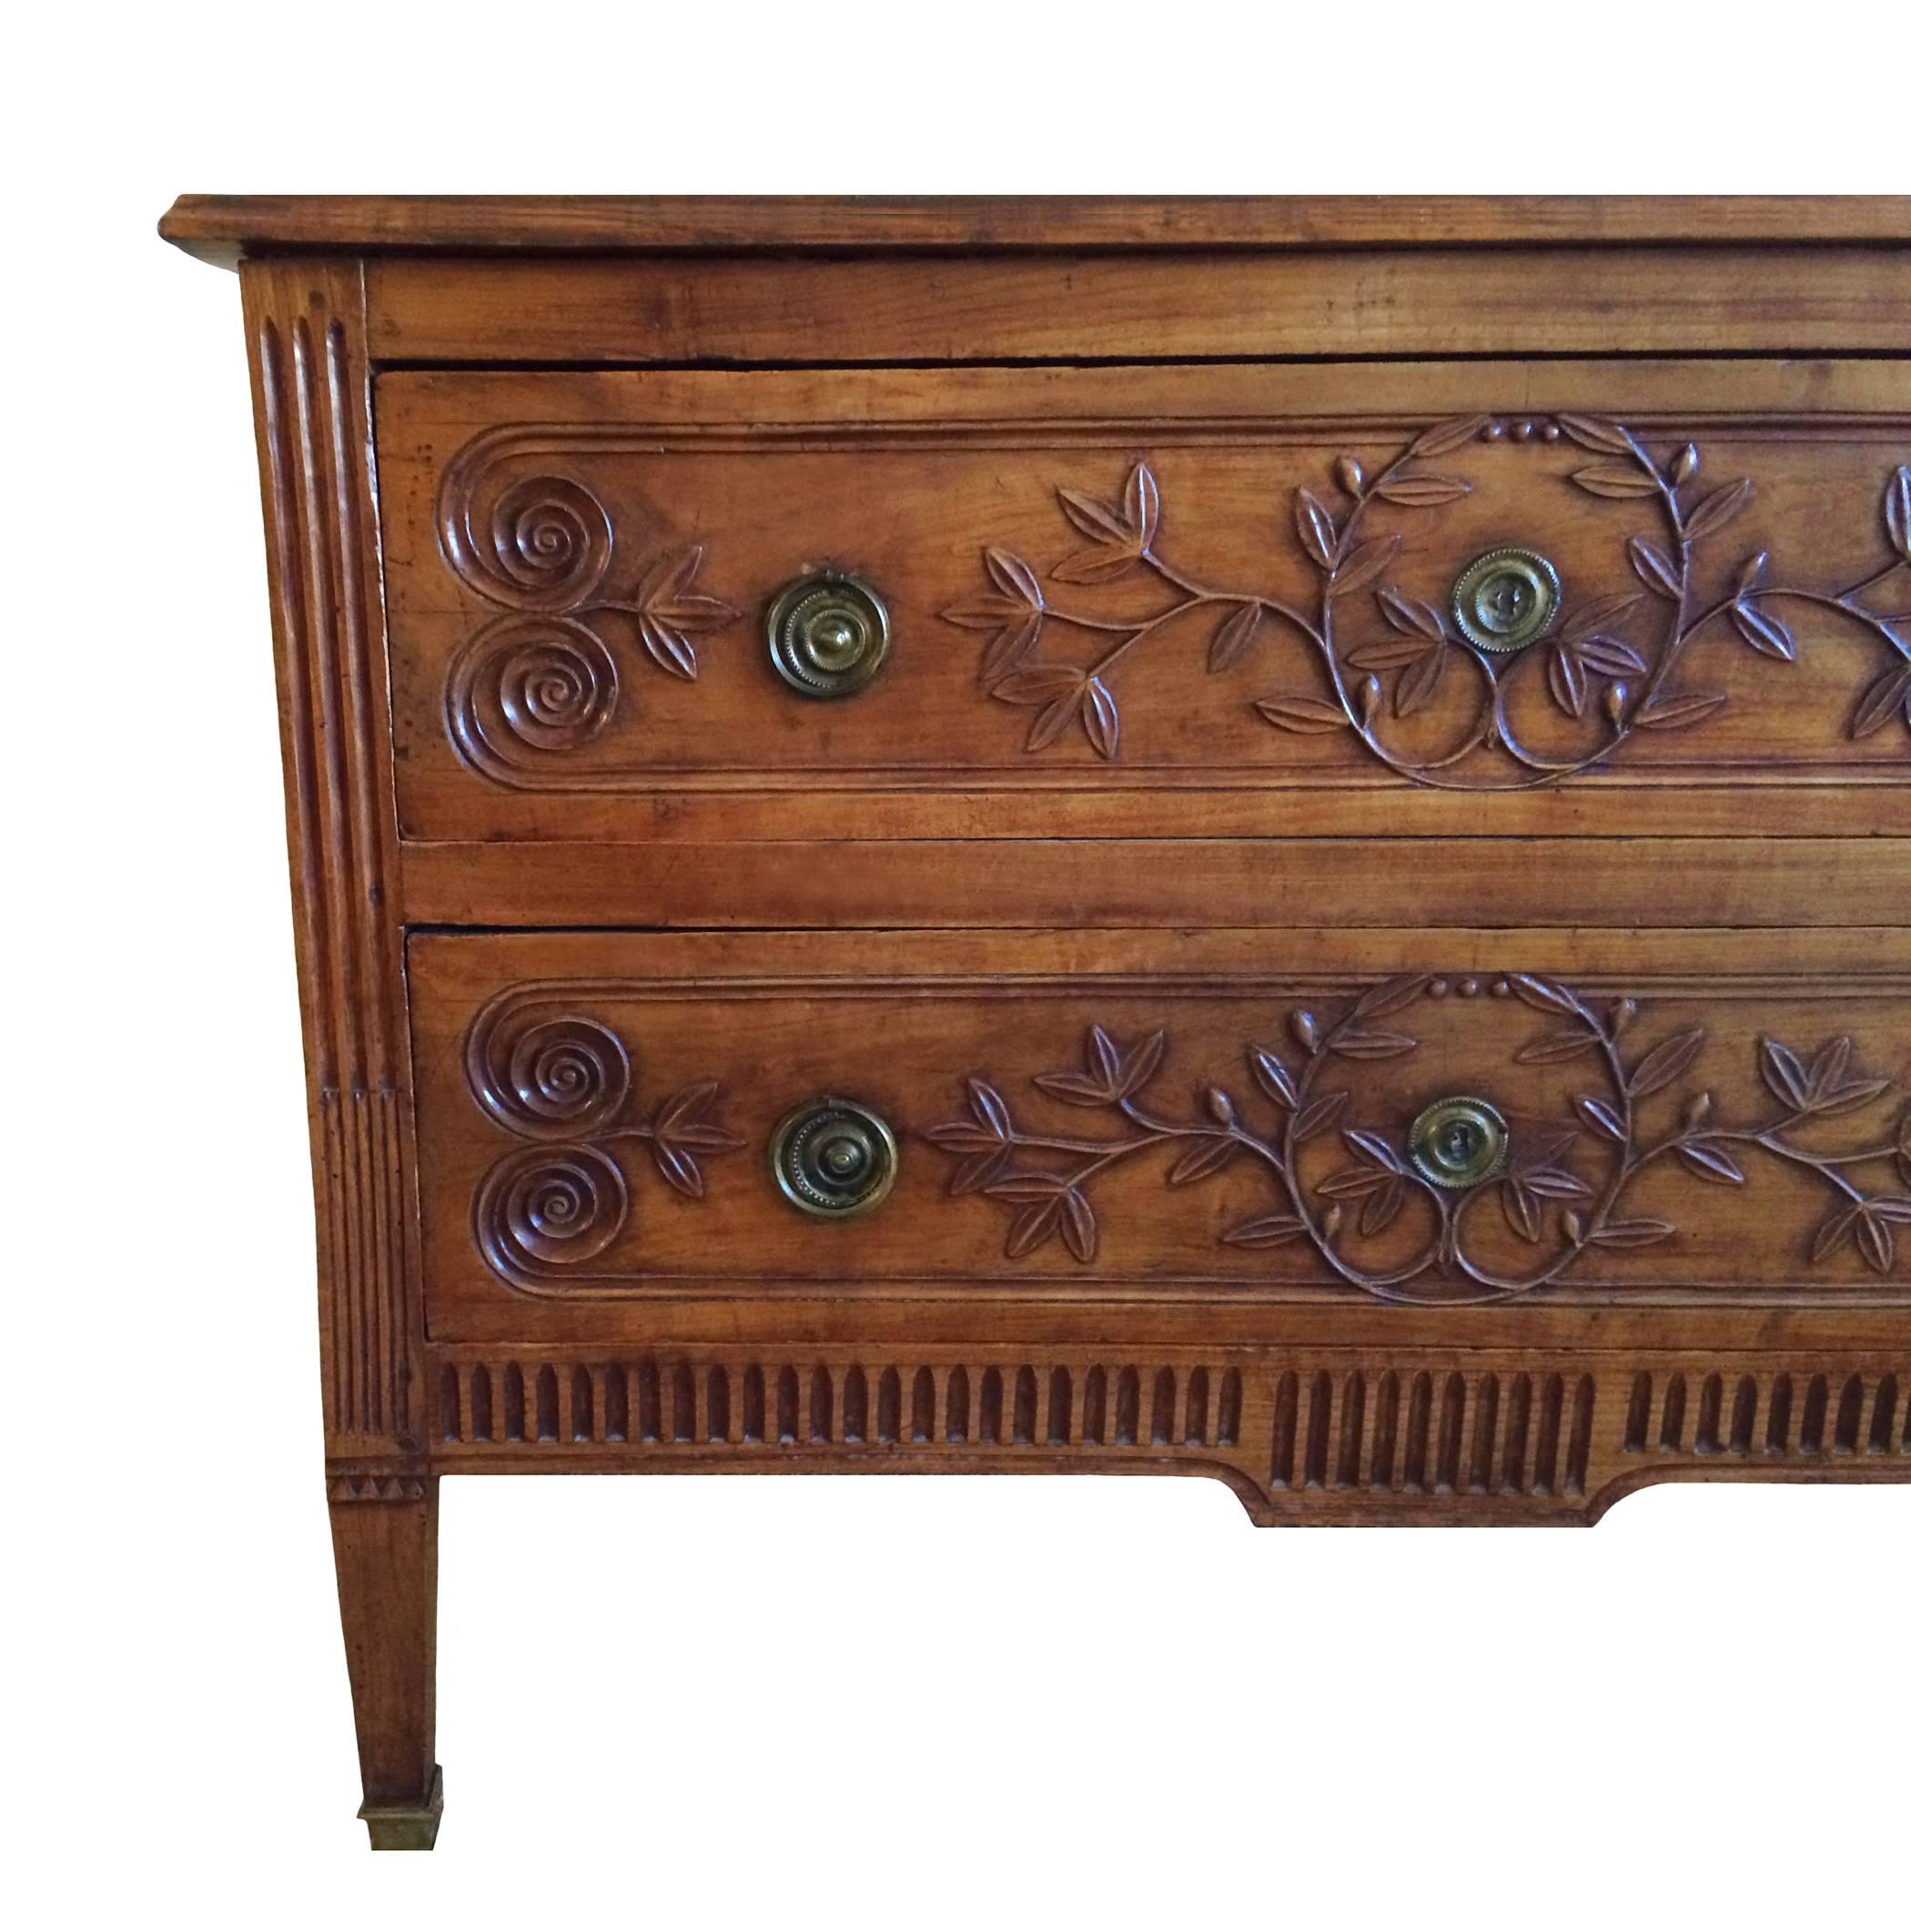 Exceptional Louis XVI walnut commode with classical vine carving, fluted detailing; ormolu hardware; 18th century.